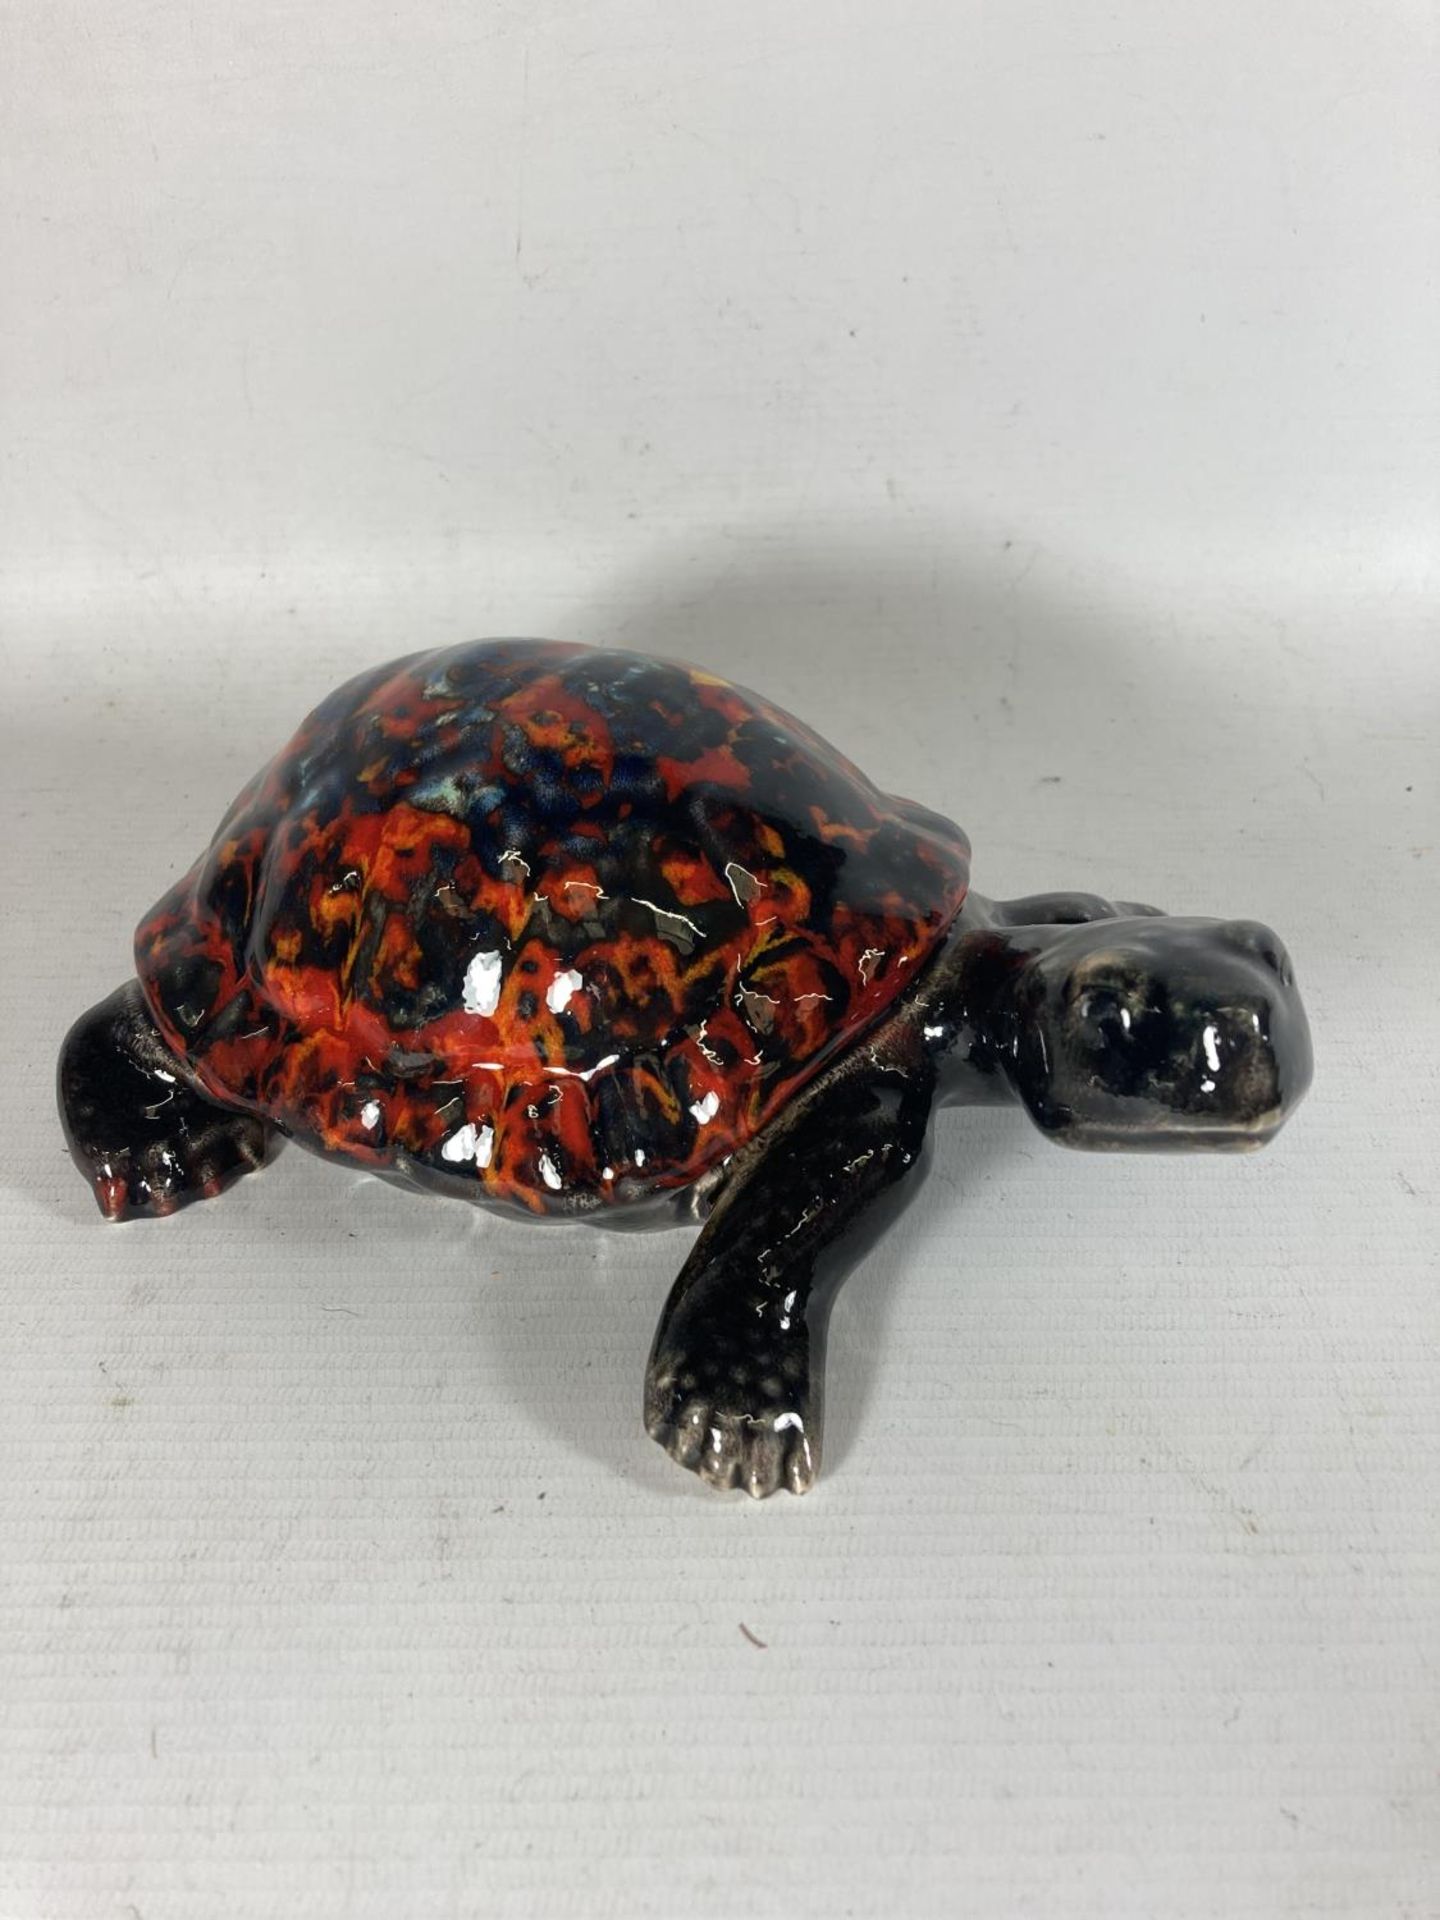 AN ANITA HARRIS TORTOISE FIGURE HAND PAINTED AND SIGNED IN GOLD